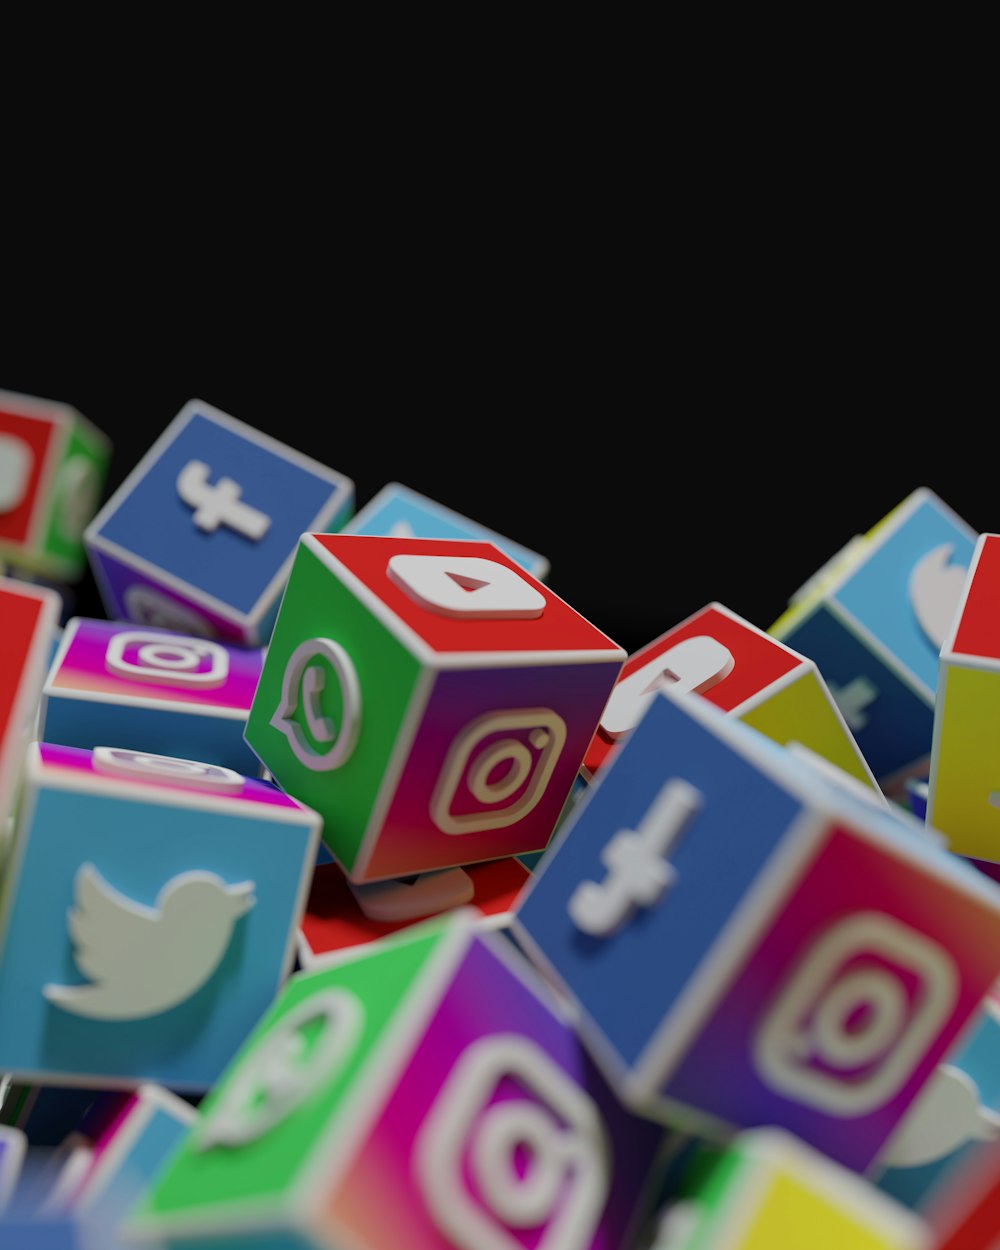 a pile of colorful blocks with social icons on them